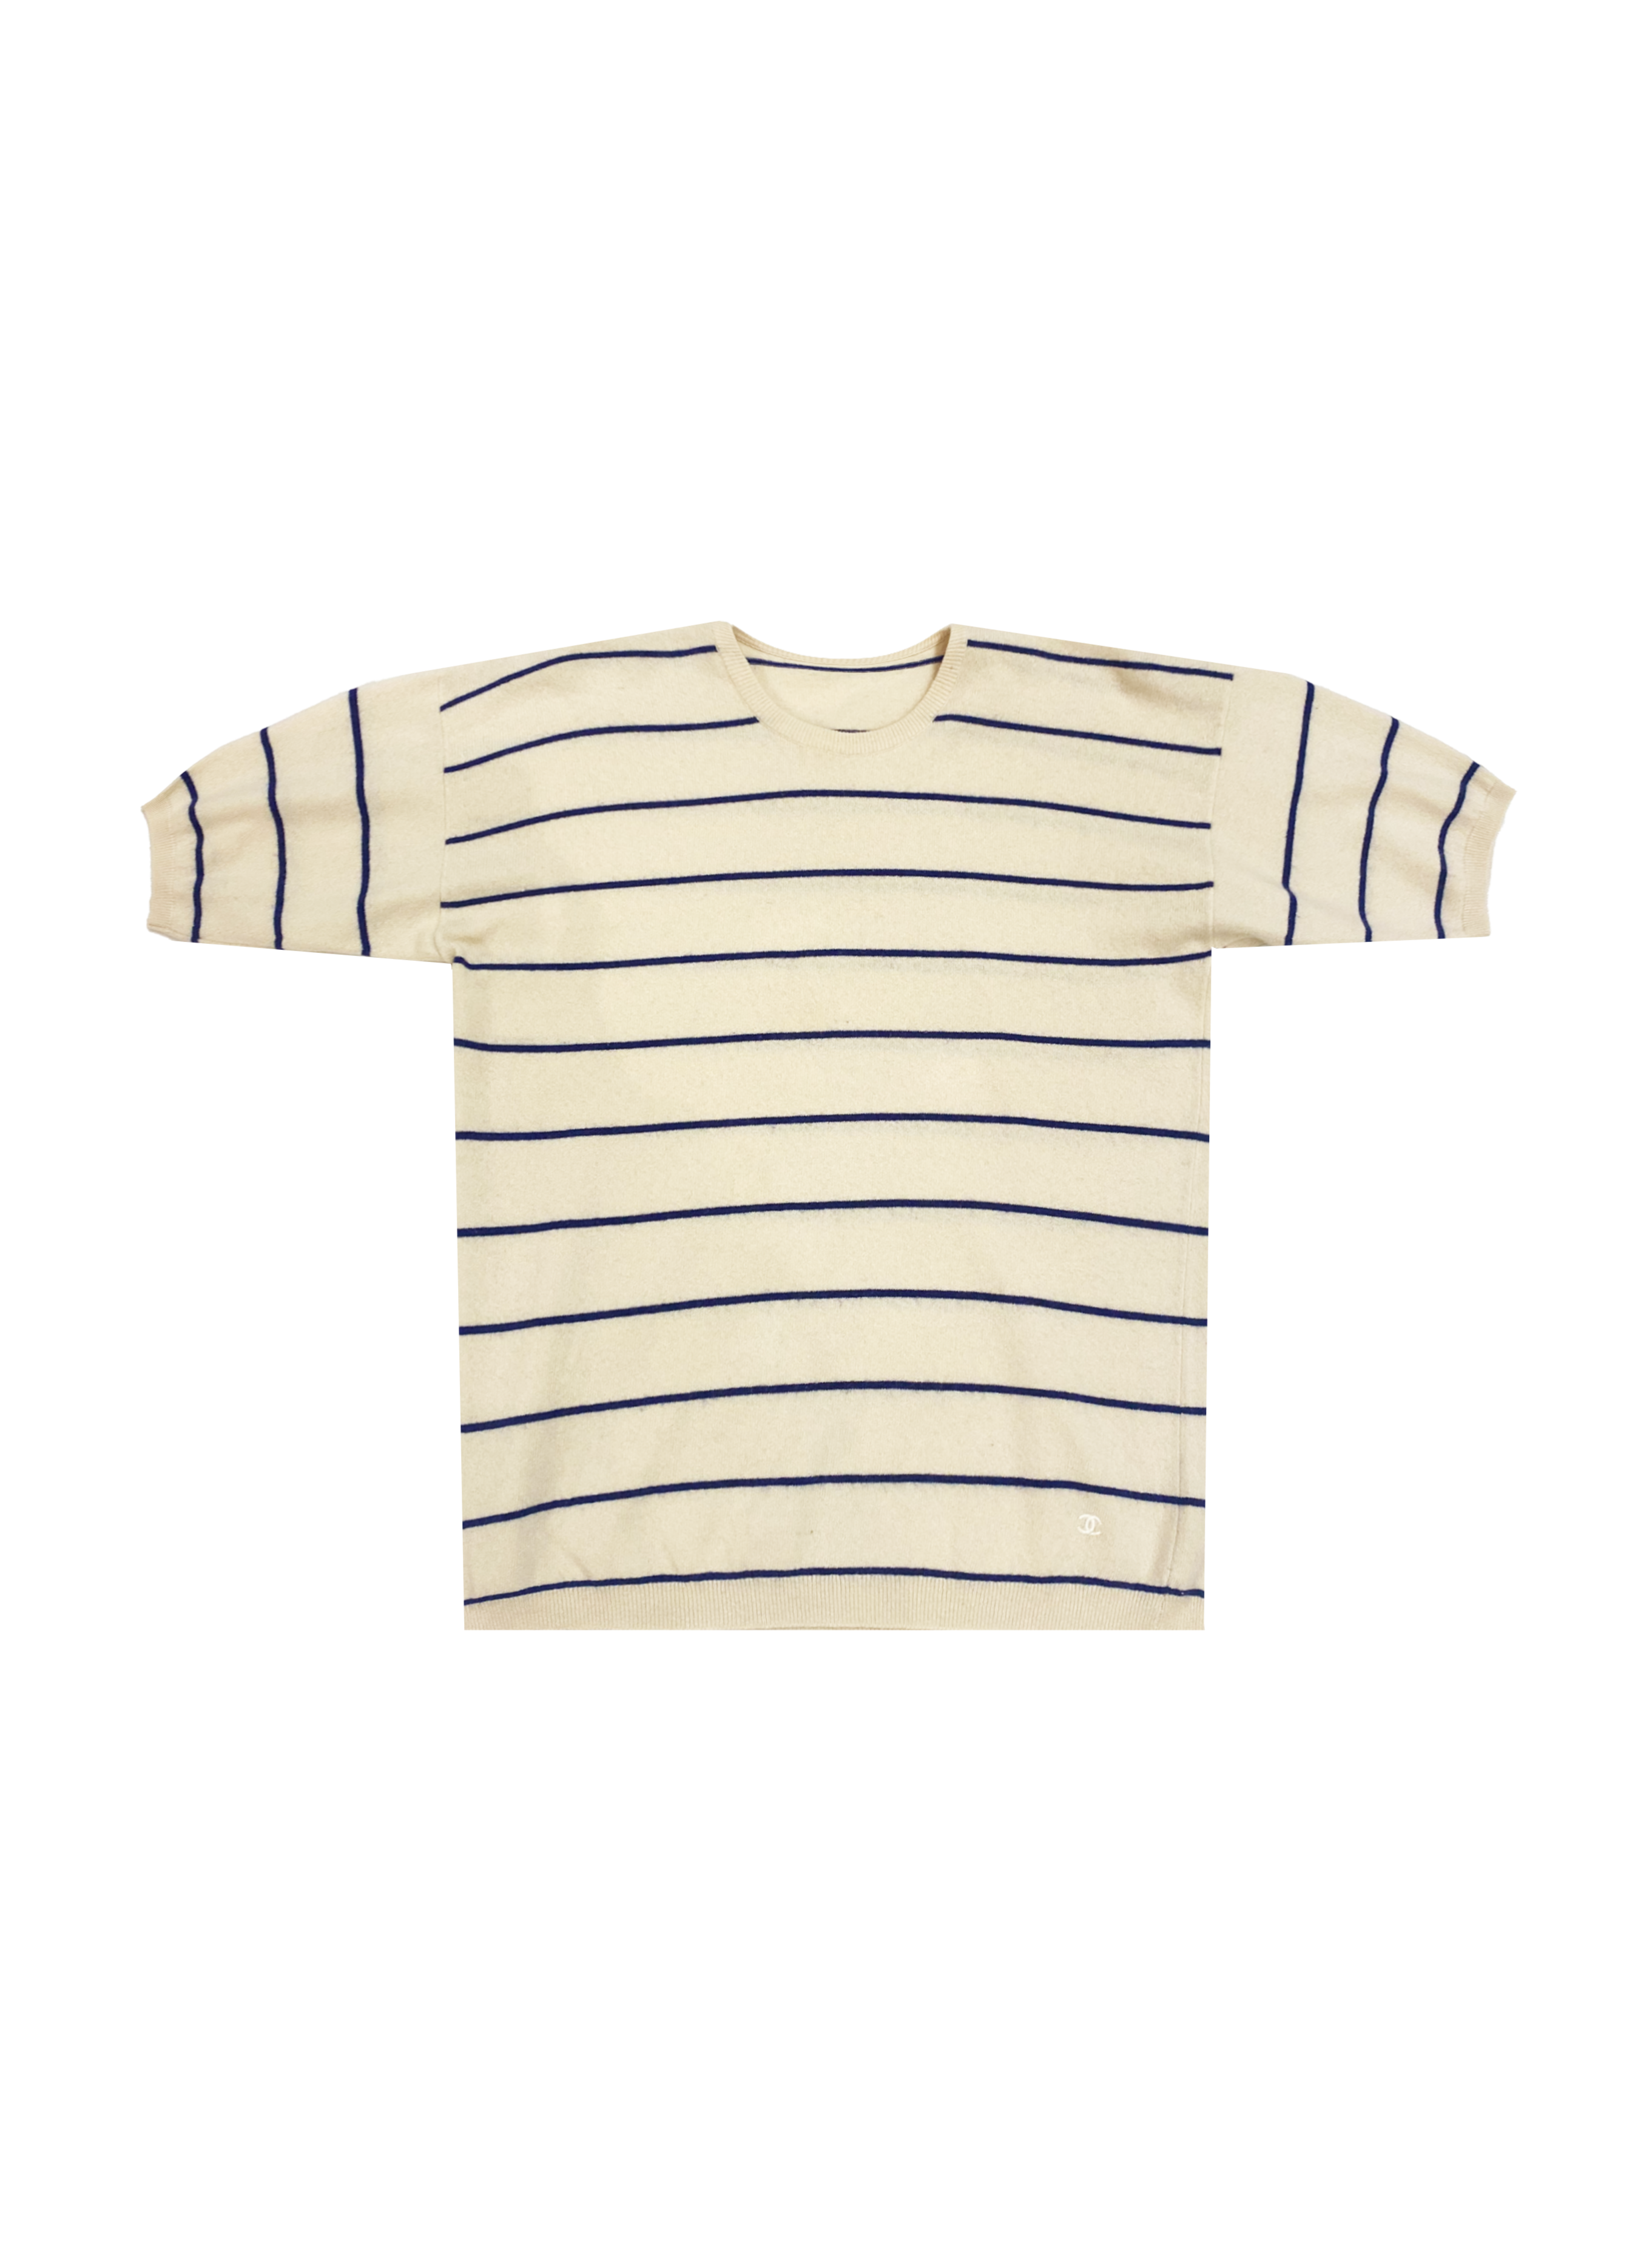 Chanel 1980s Cashmere Cream and Navy Striped Sweater